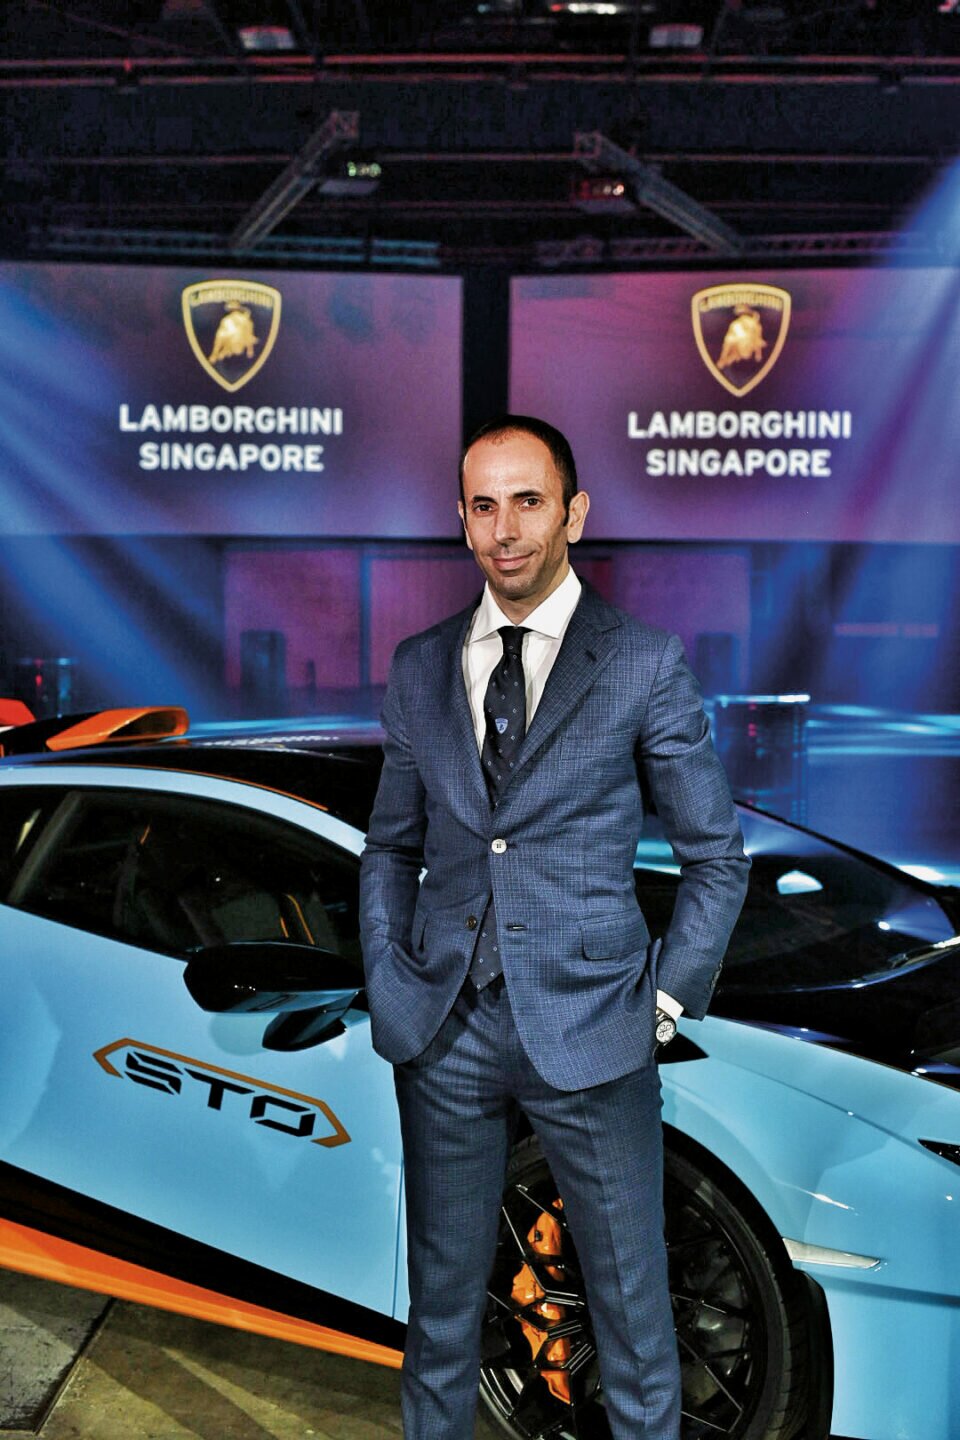 With A Lamborghini, You Have To Get Emotional